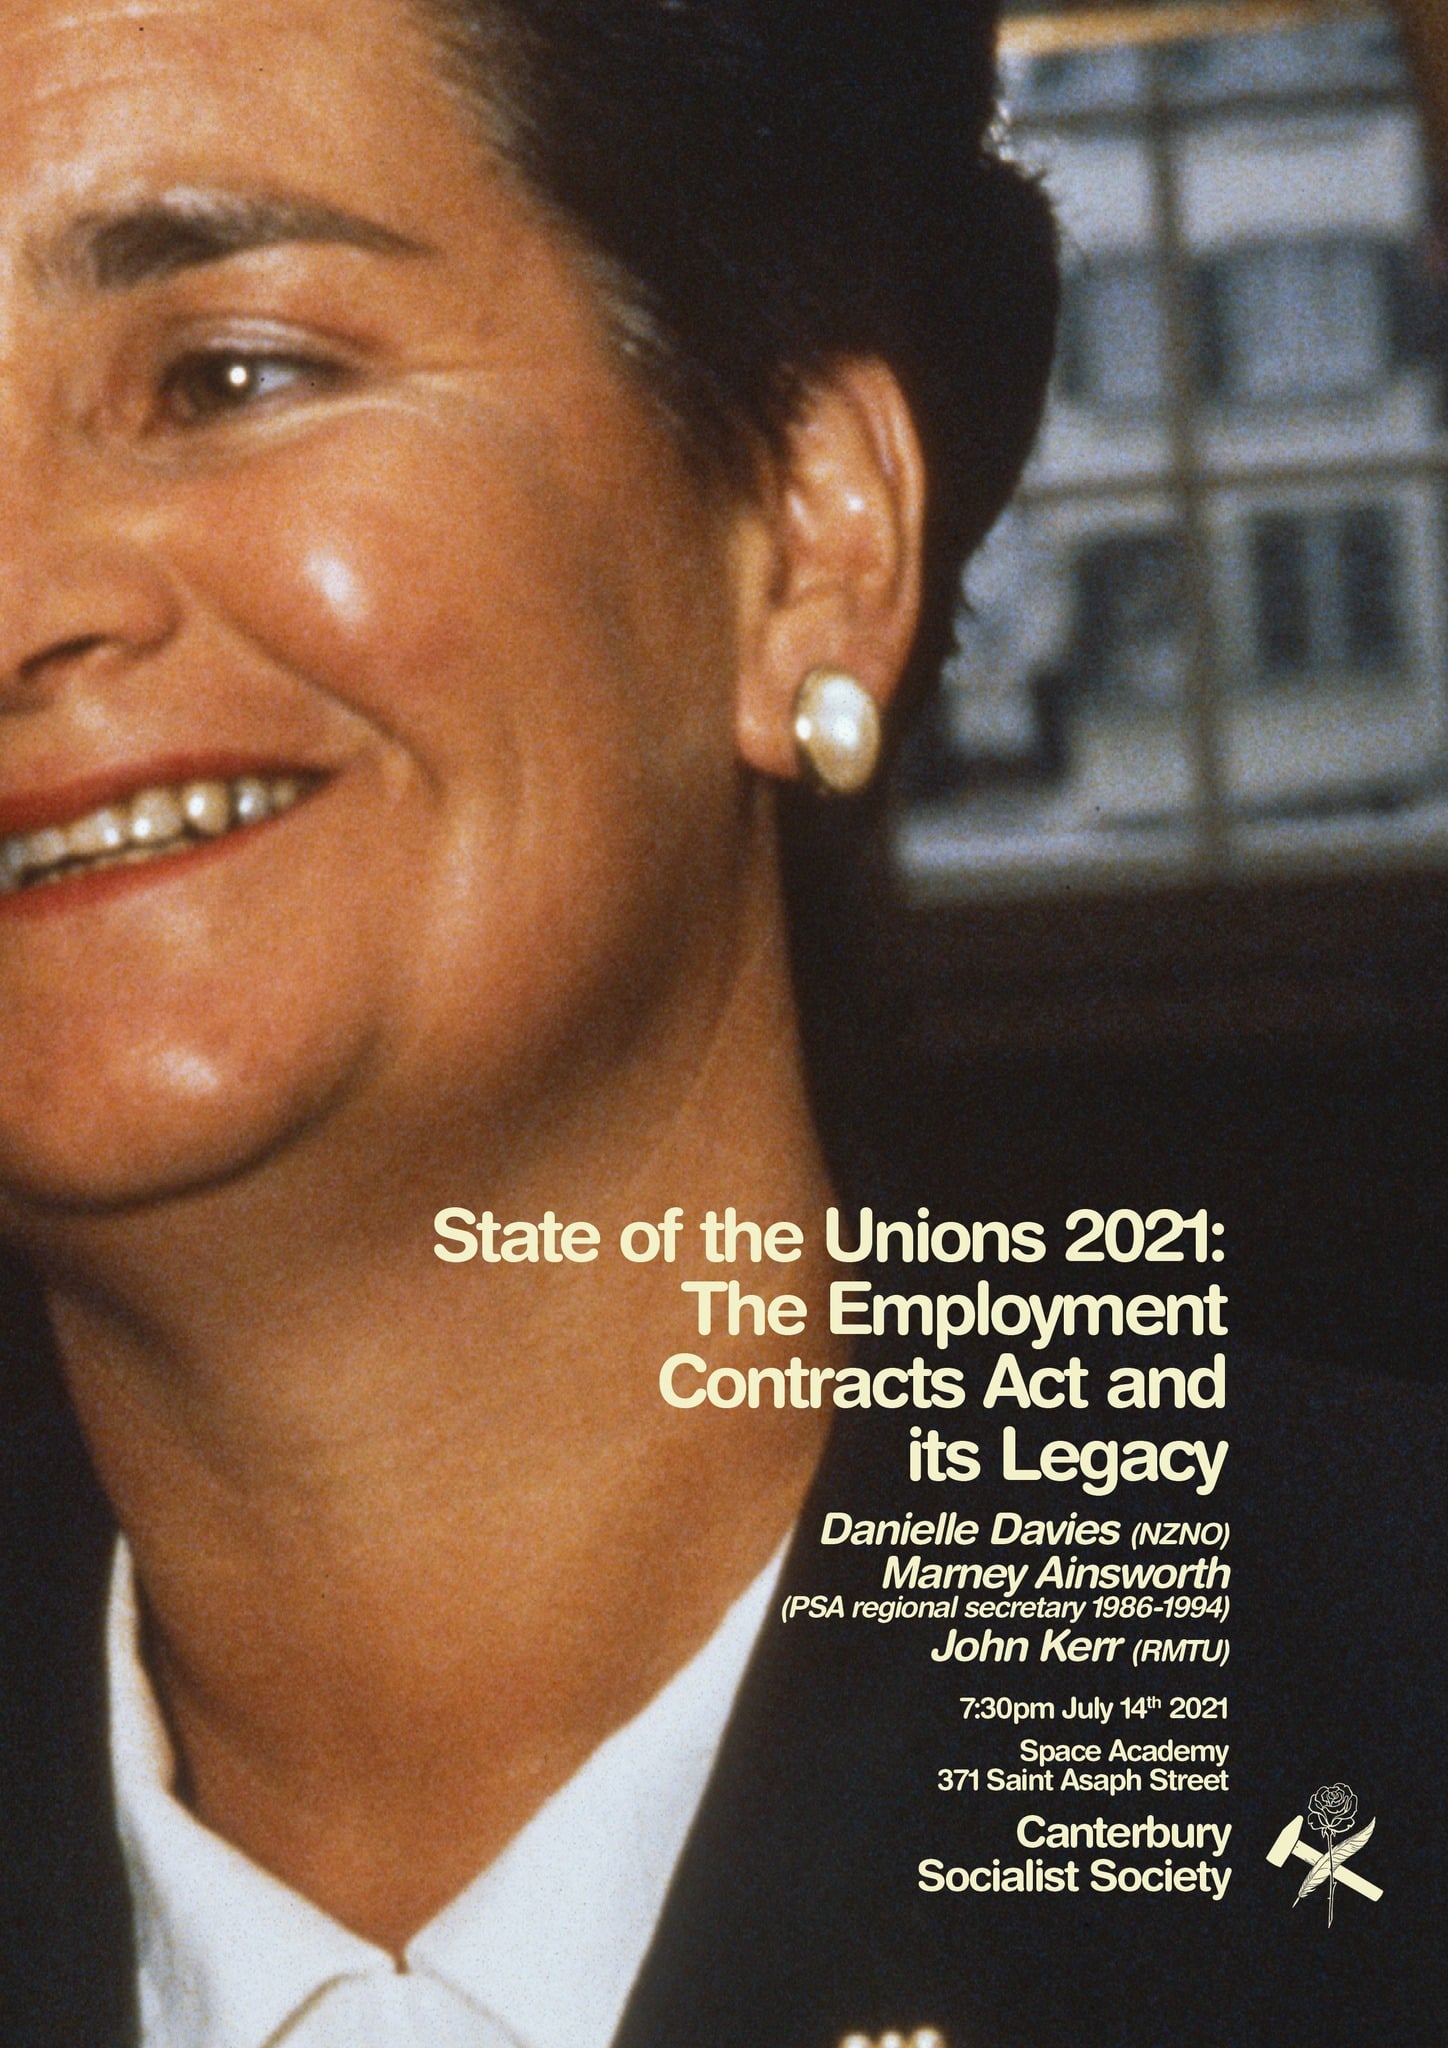 State of the Unions 2021: The Employment Contracts Act and its Legacy